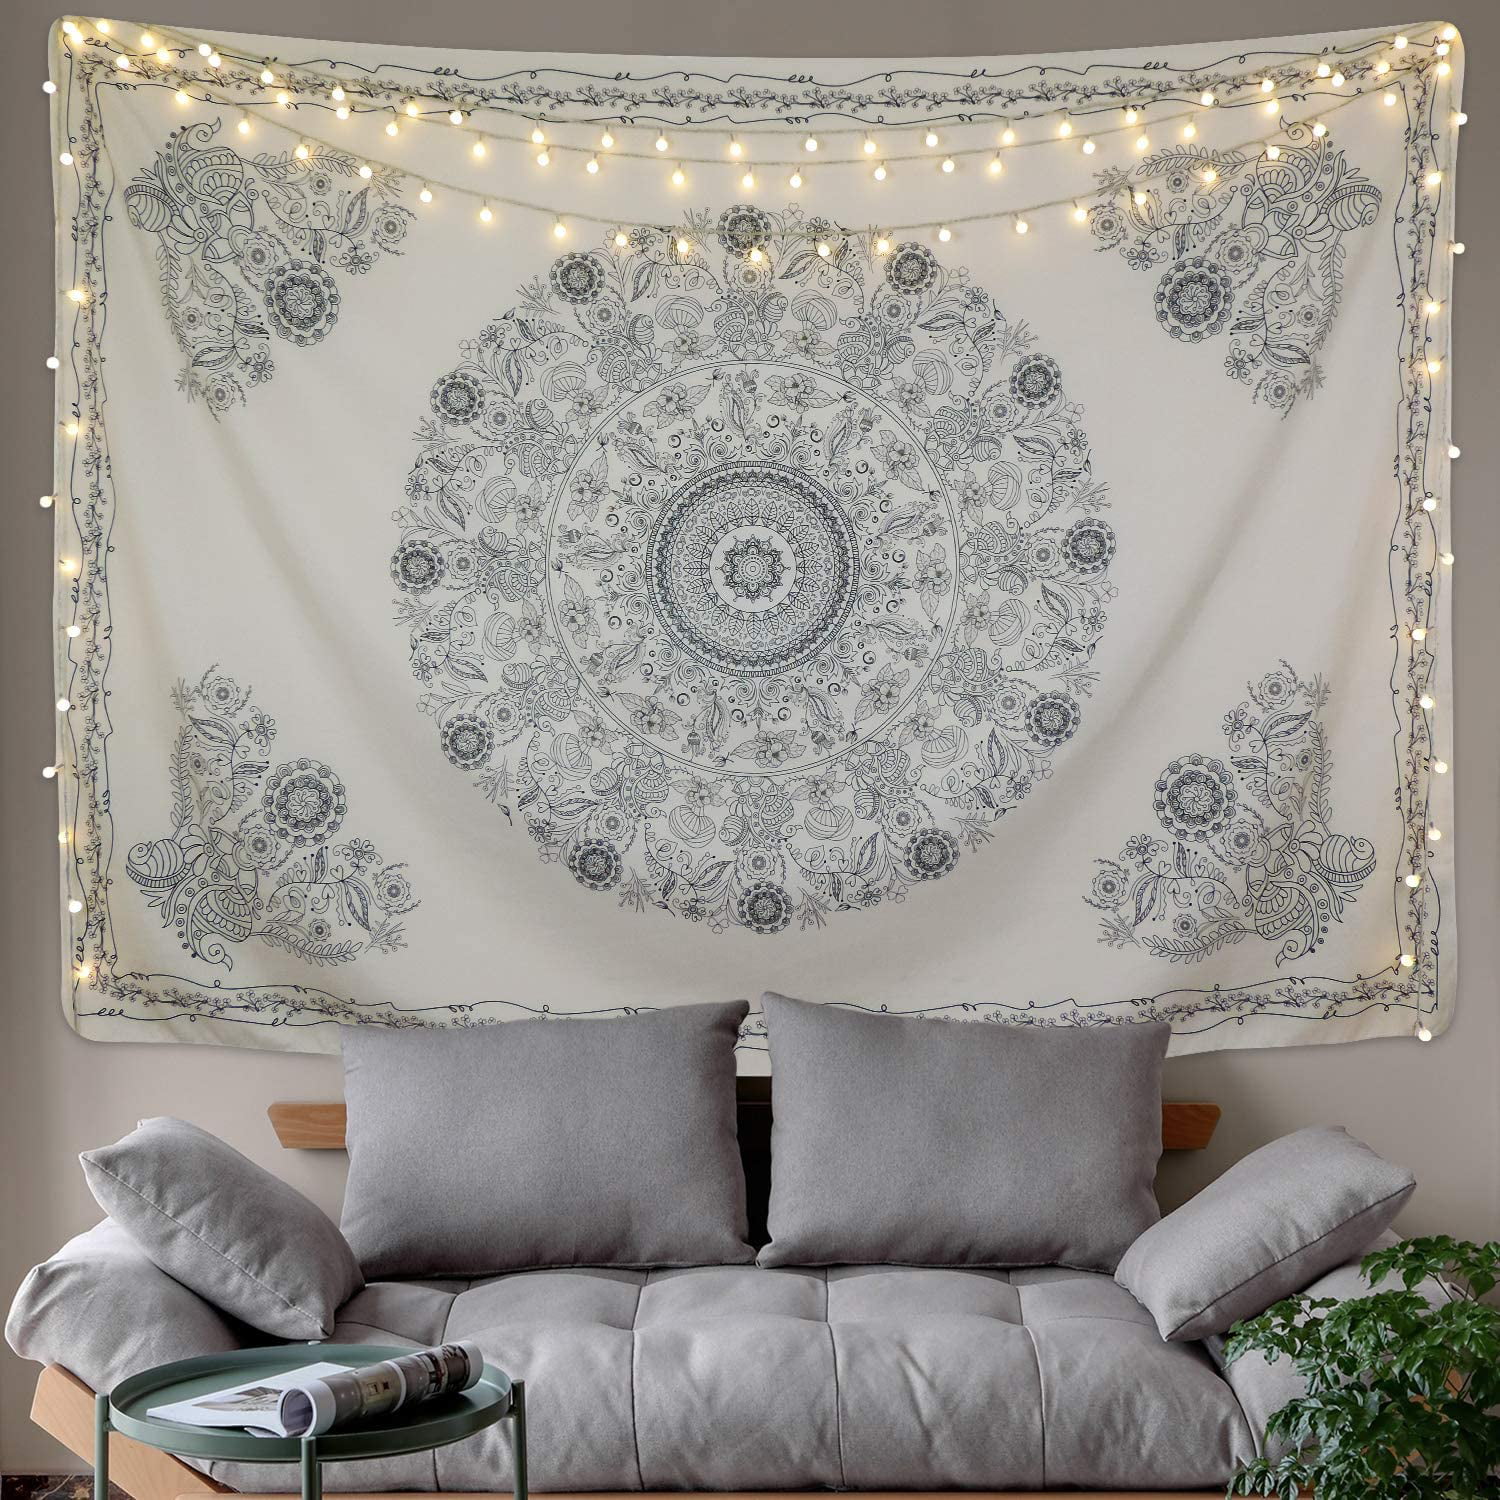 59.1-82.7 inches, Mandala Tapestry Tapestry Mandala Hippie Bohemian Tapestries Wall Hanging Flower Psychedelic Tapestry Wall Hanging Indian Dorm Decor for Living Room Bedroom 